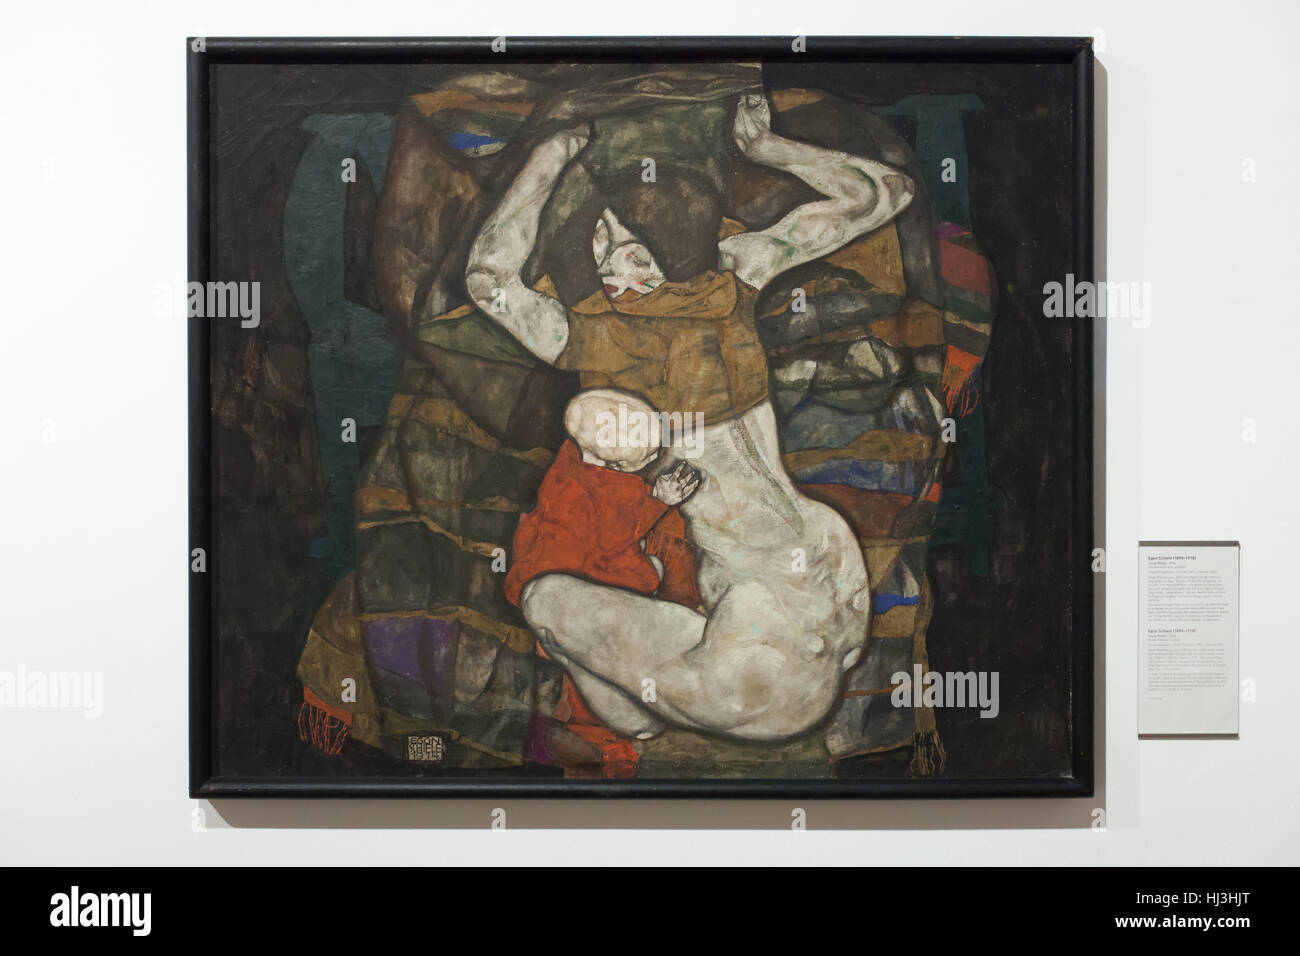 Painting Young Mother (1914) by Austrian expressionist painter Egon Schiele on display in the Wien Museum (Vienna Museum) in Vienna, Austria. Stock Photo